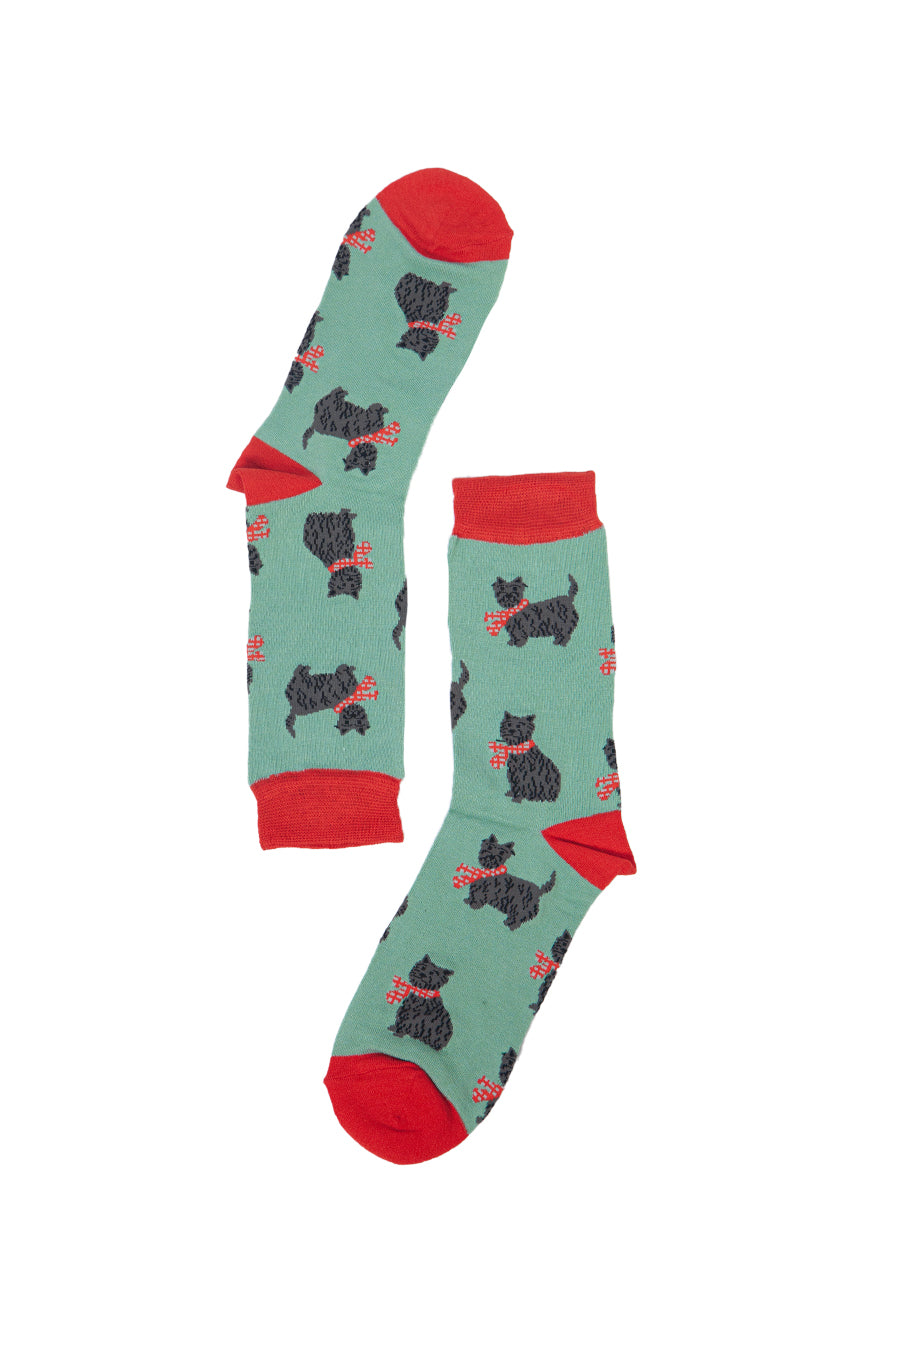 green and red bamboo socks with a west highland terrier print